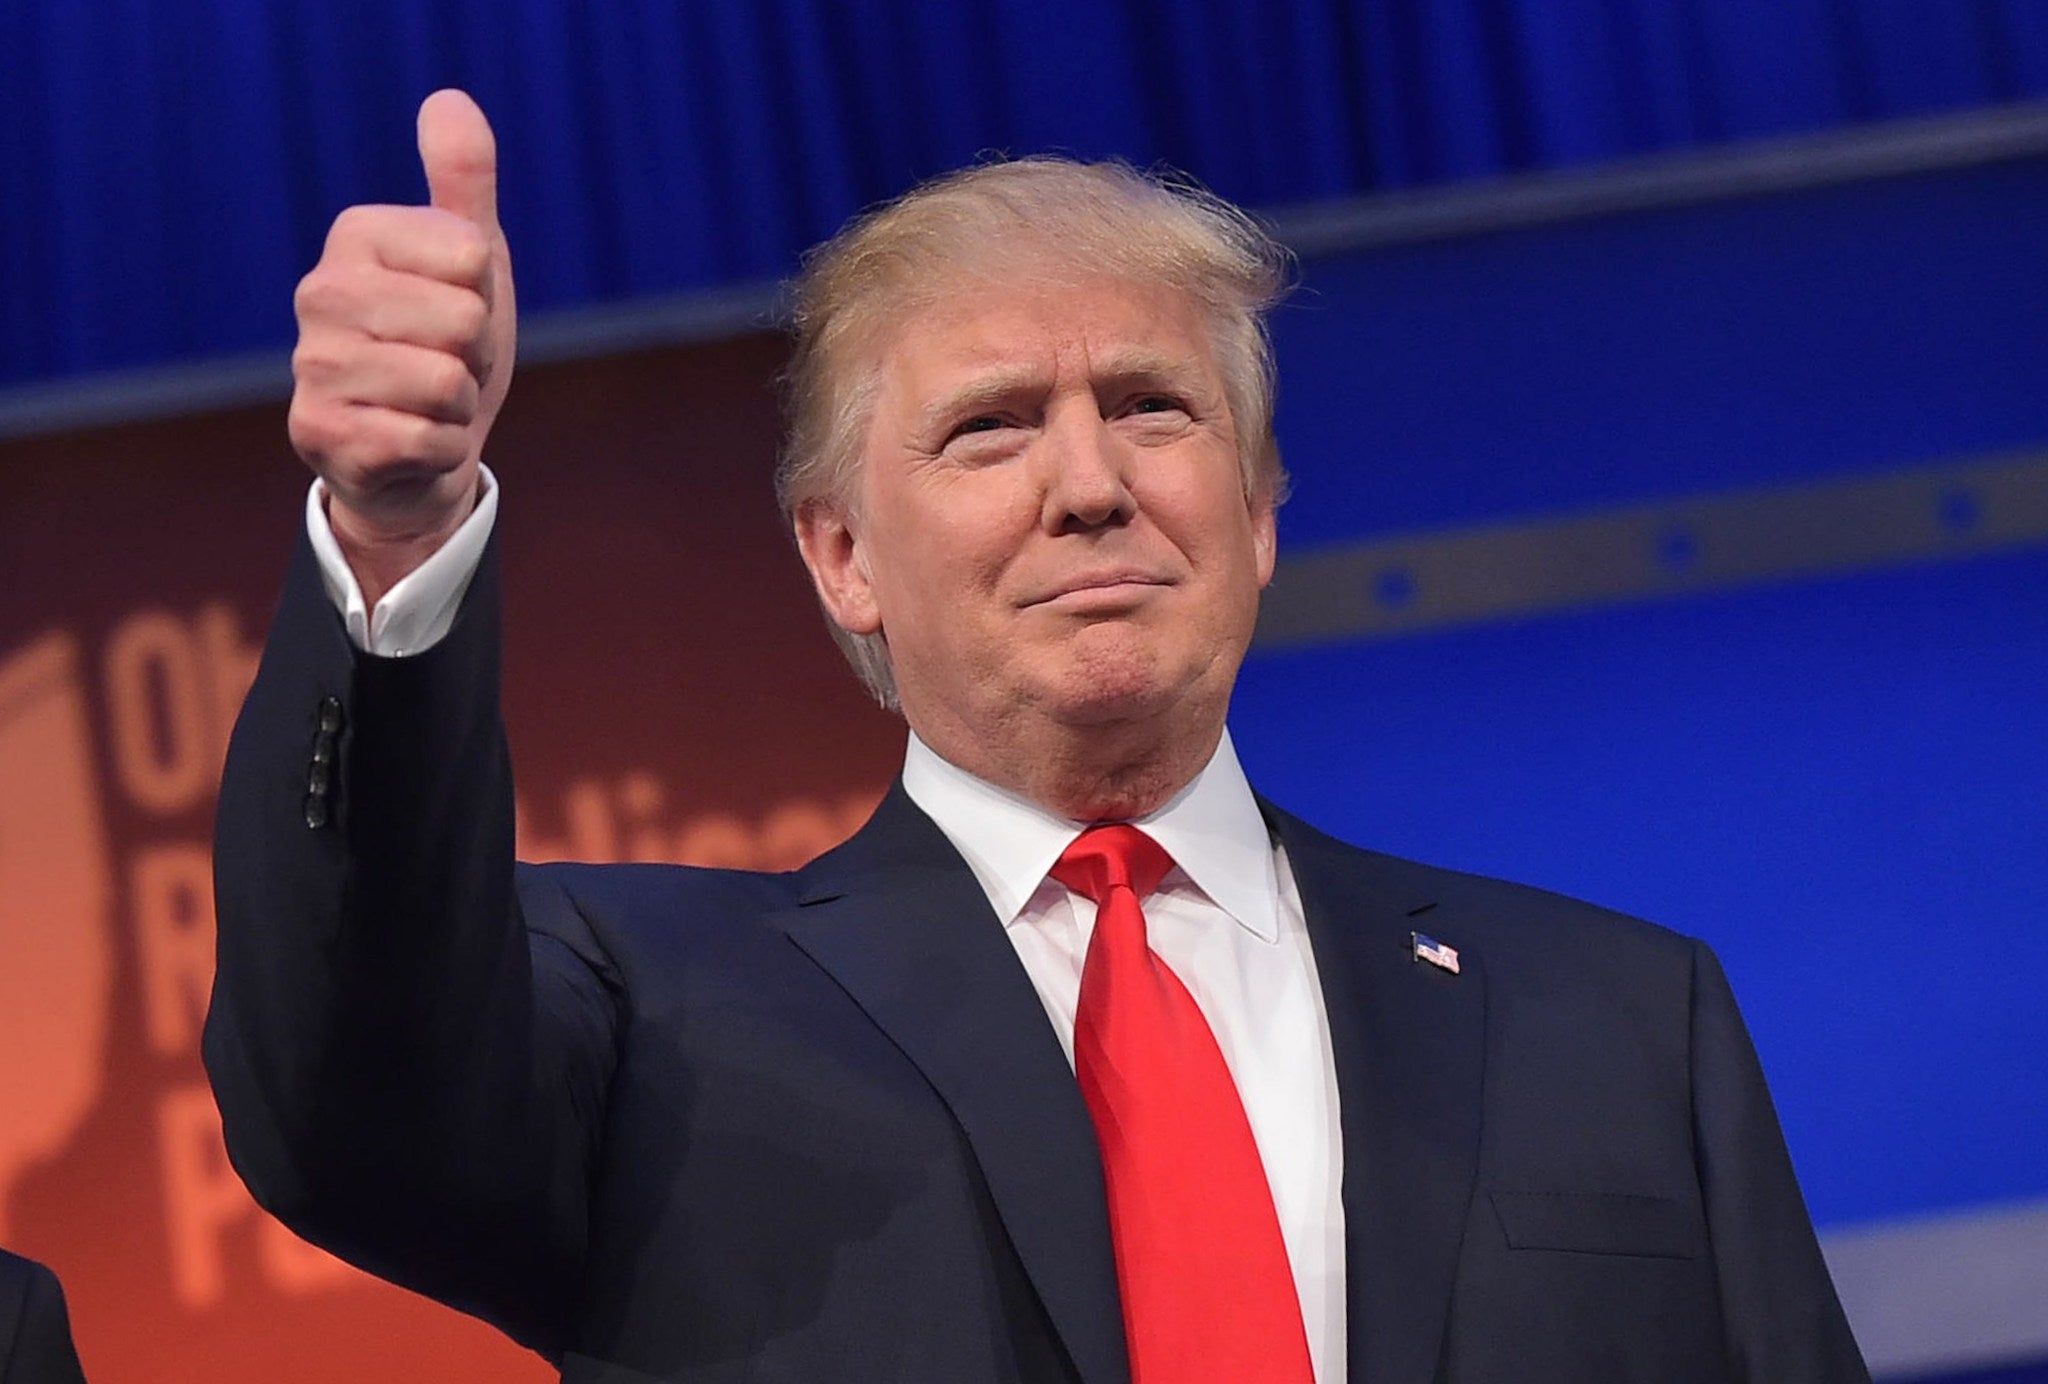 Donald Trump gives a thumbs-up during Republican presidential debate. (Mandel Ngan/AFP/Getty Images)